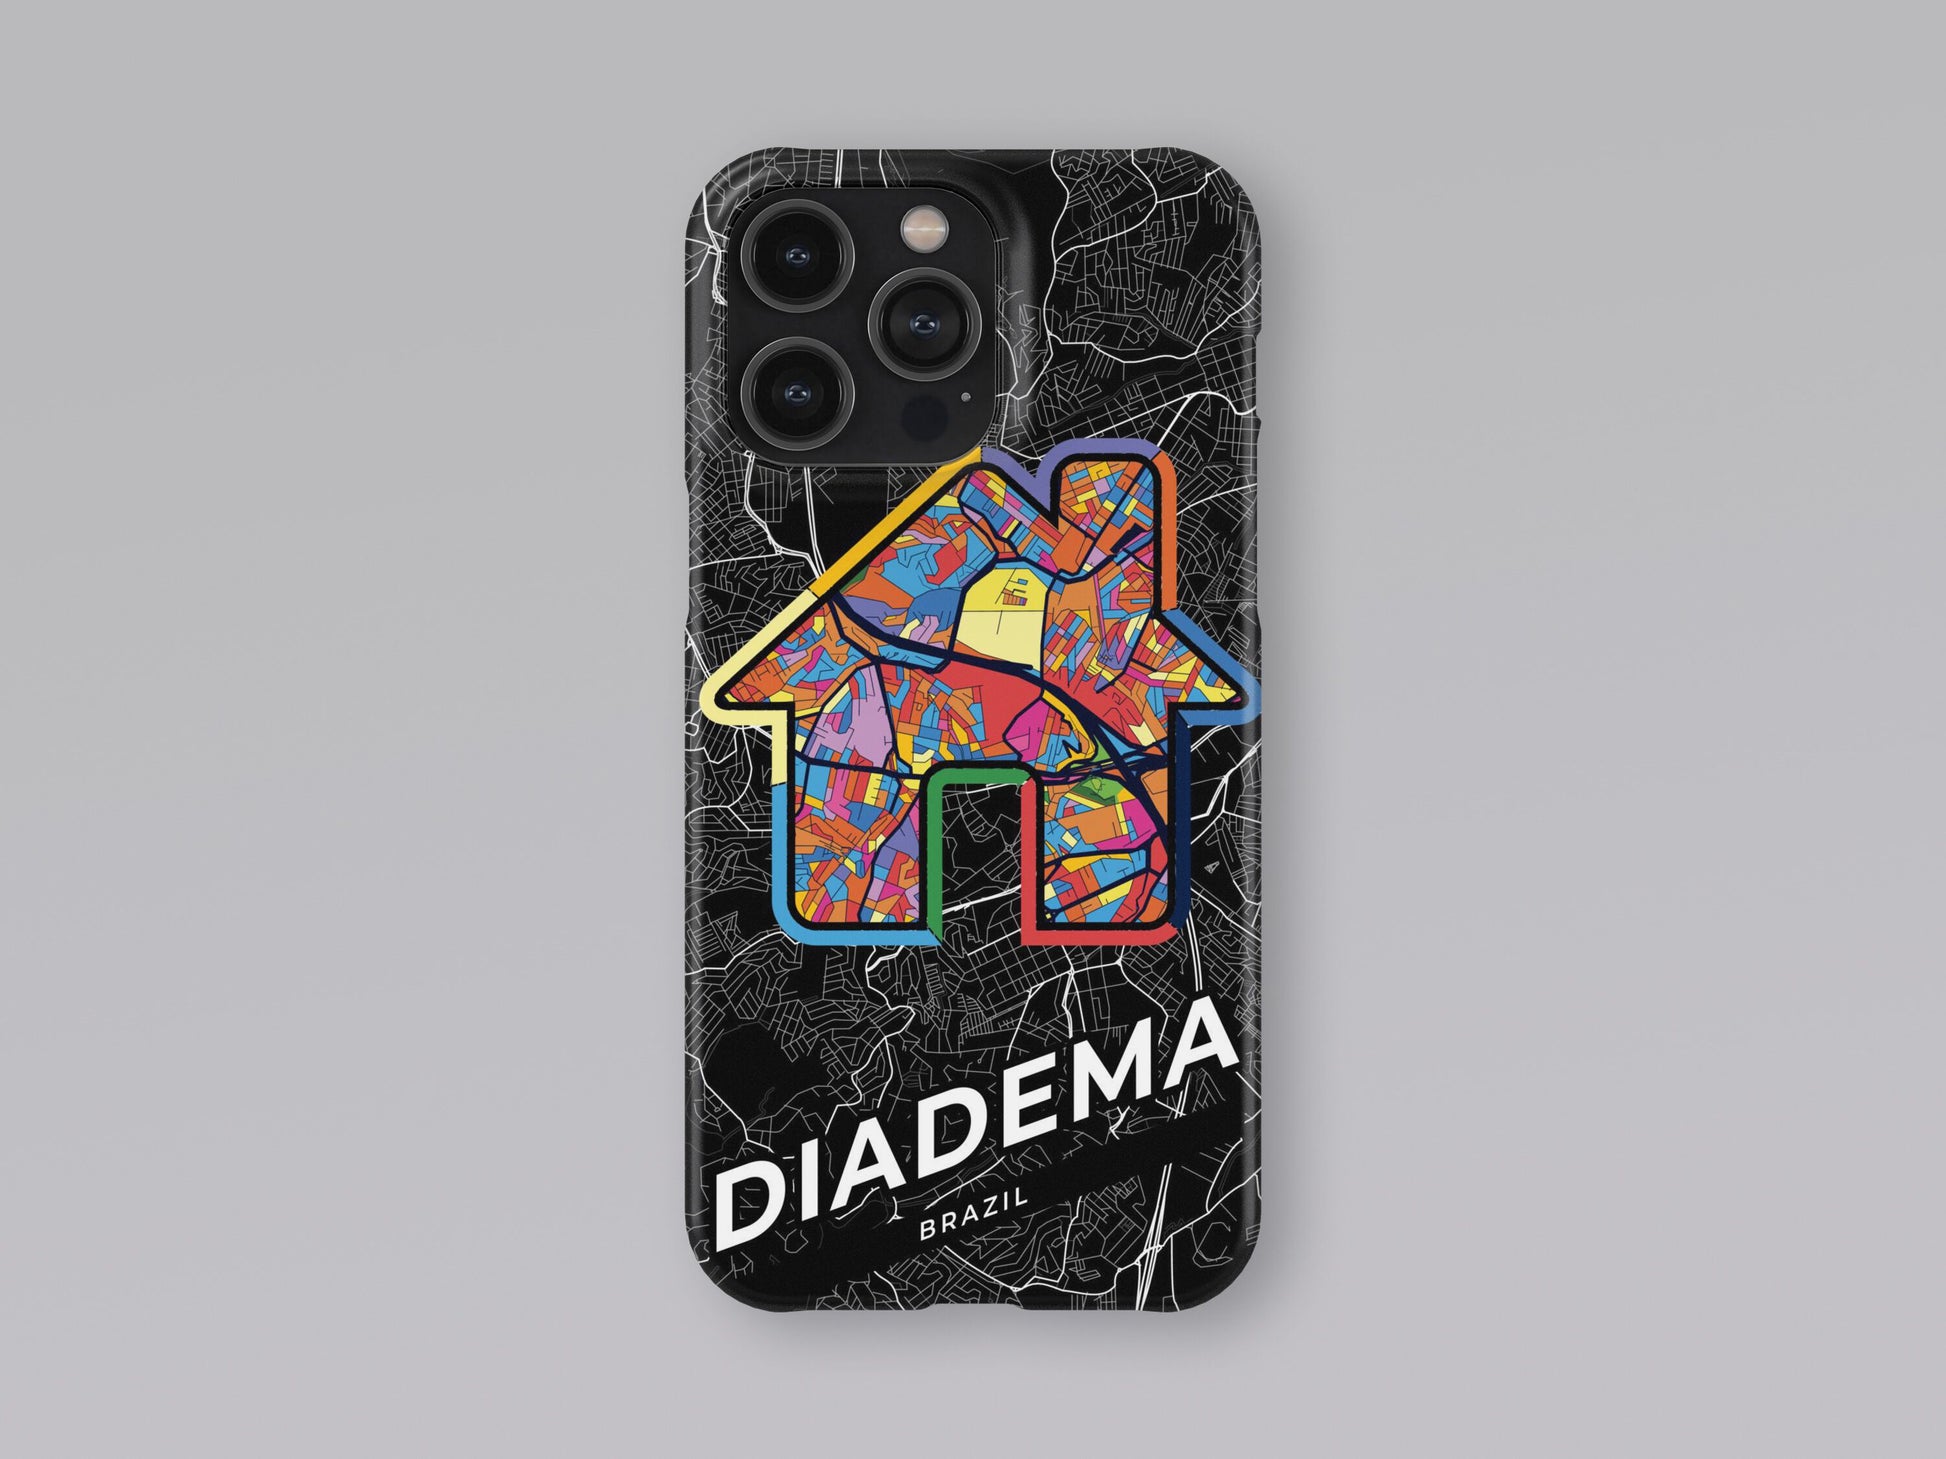 Diadema Brazil slim phone case with colorful icon. Birthday, wedding or housewarming gift. Couple match cases. 3